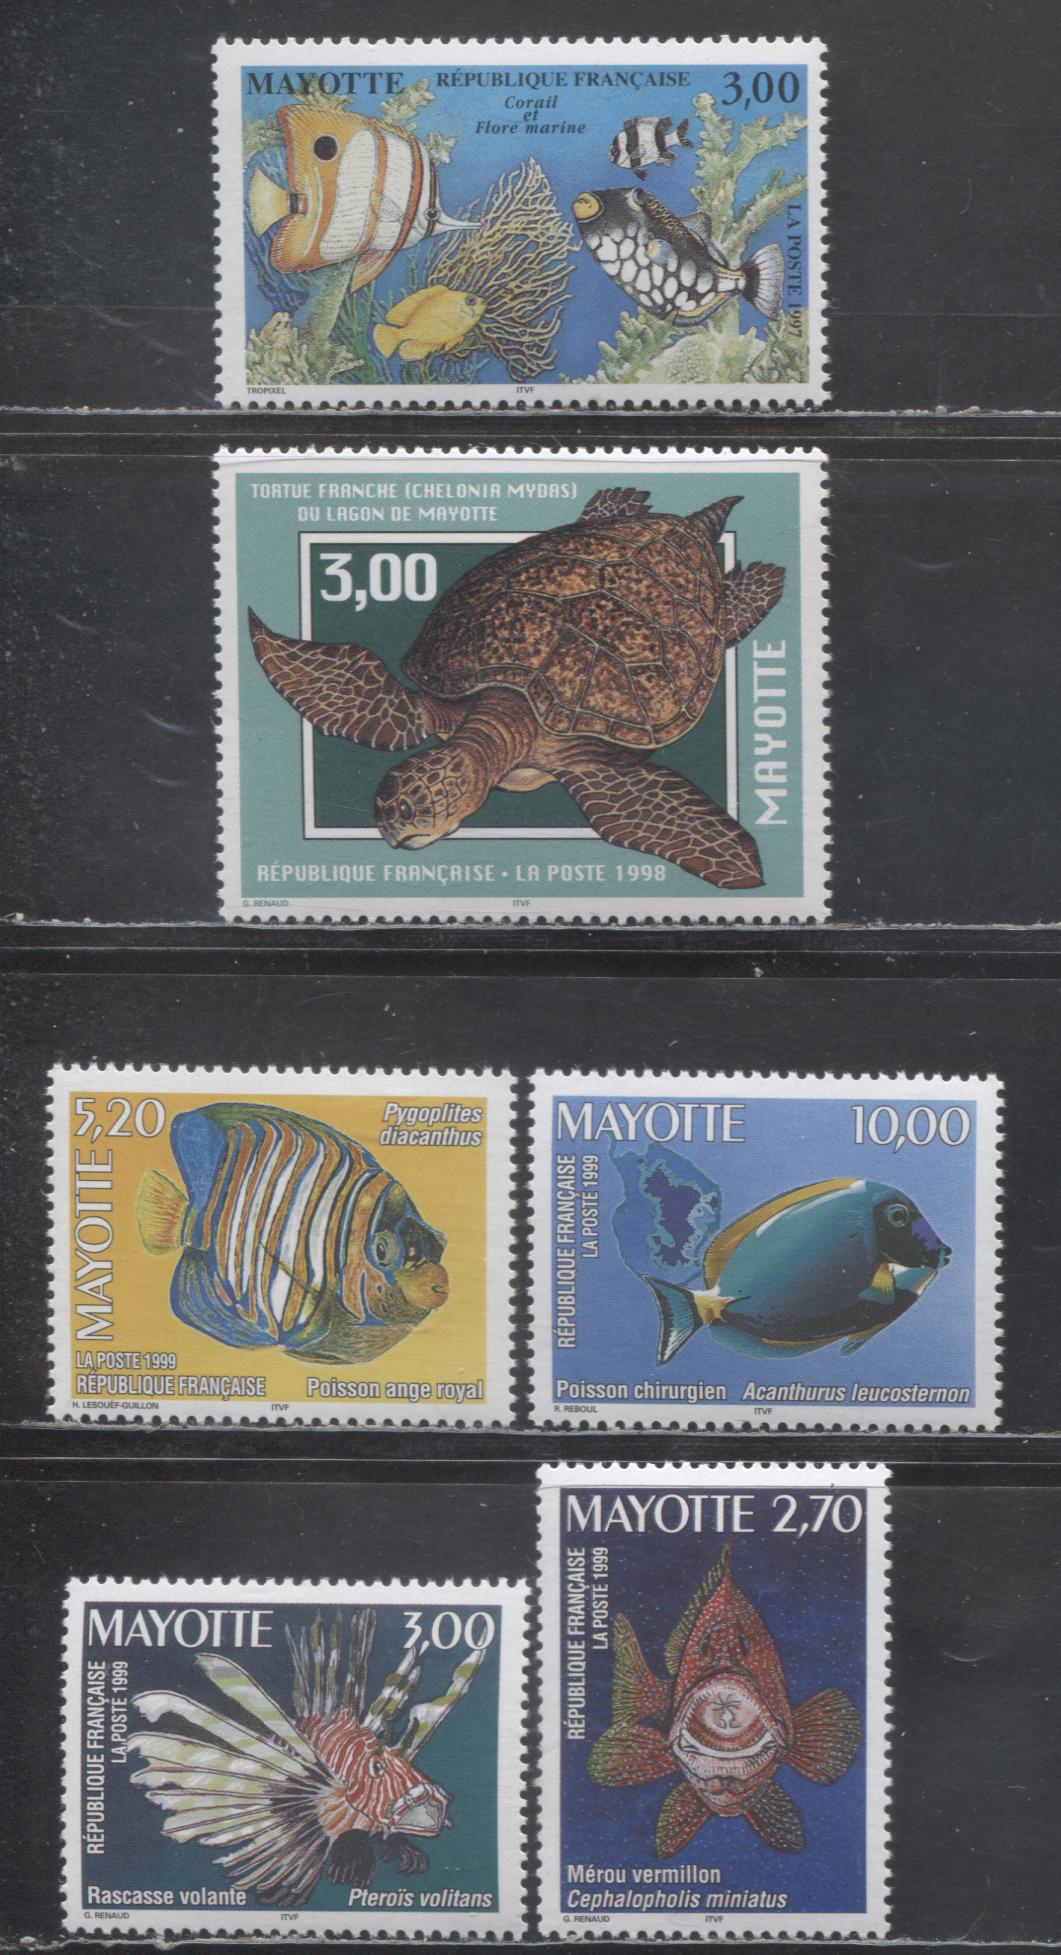 Lot 174 Mayotte (Comoro Islands) SC#91/124 1997-1999 Marine Life - Fish Definitives, 6 VFNH Singles, Click on Listing to See ALL Pictures, 2017 Scott Cat. $12.75